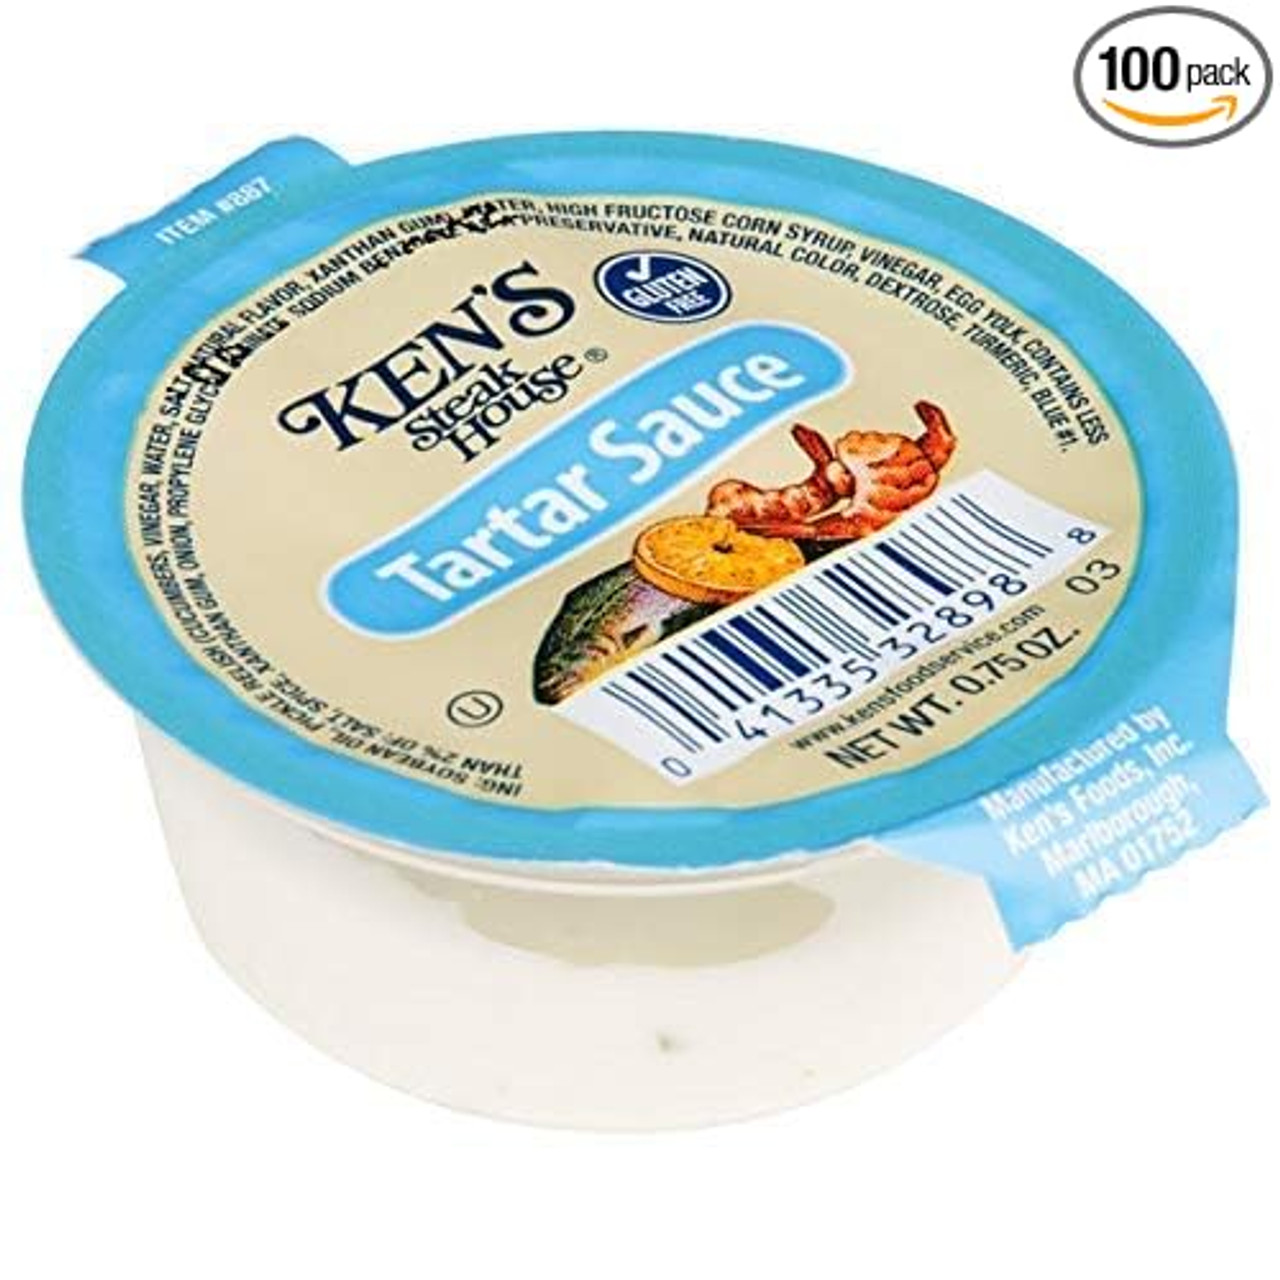 Ken's 0.75 oz. Tartar Sauce Tangy & Sweet Relish Dipping Cup - 100/Case - Chicken Pieces